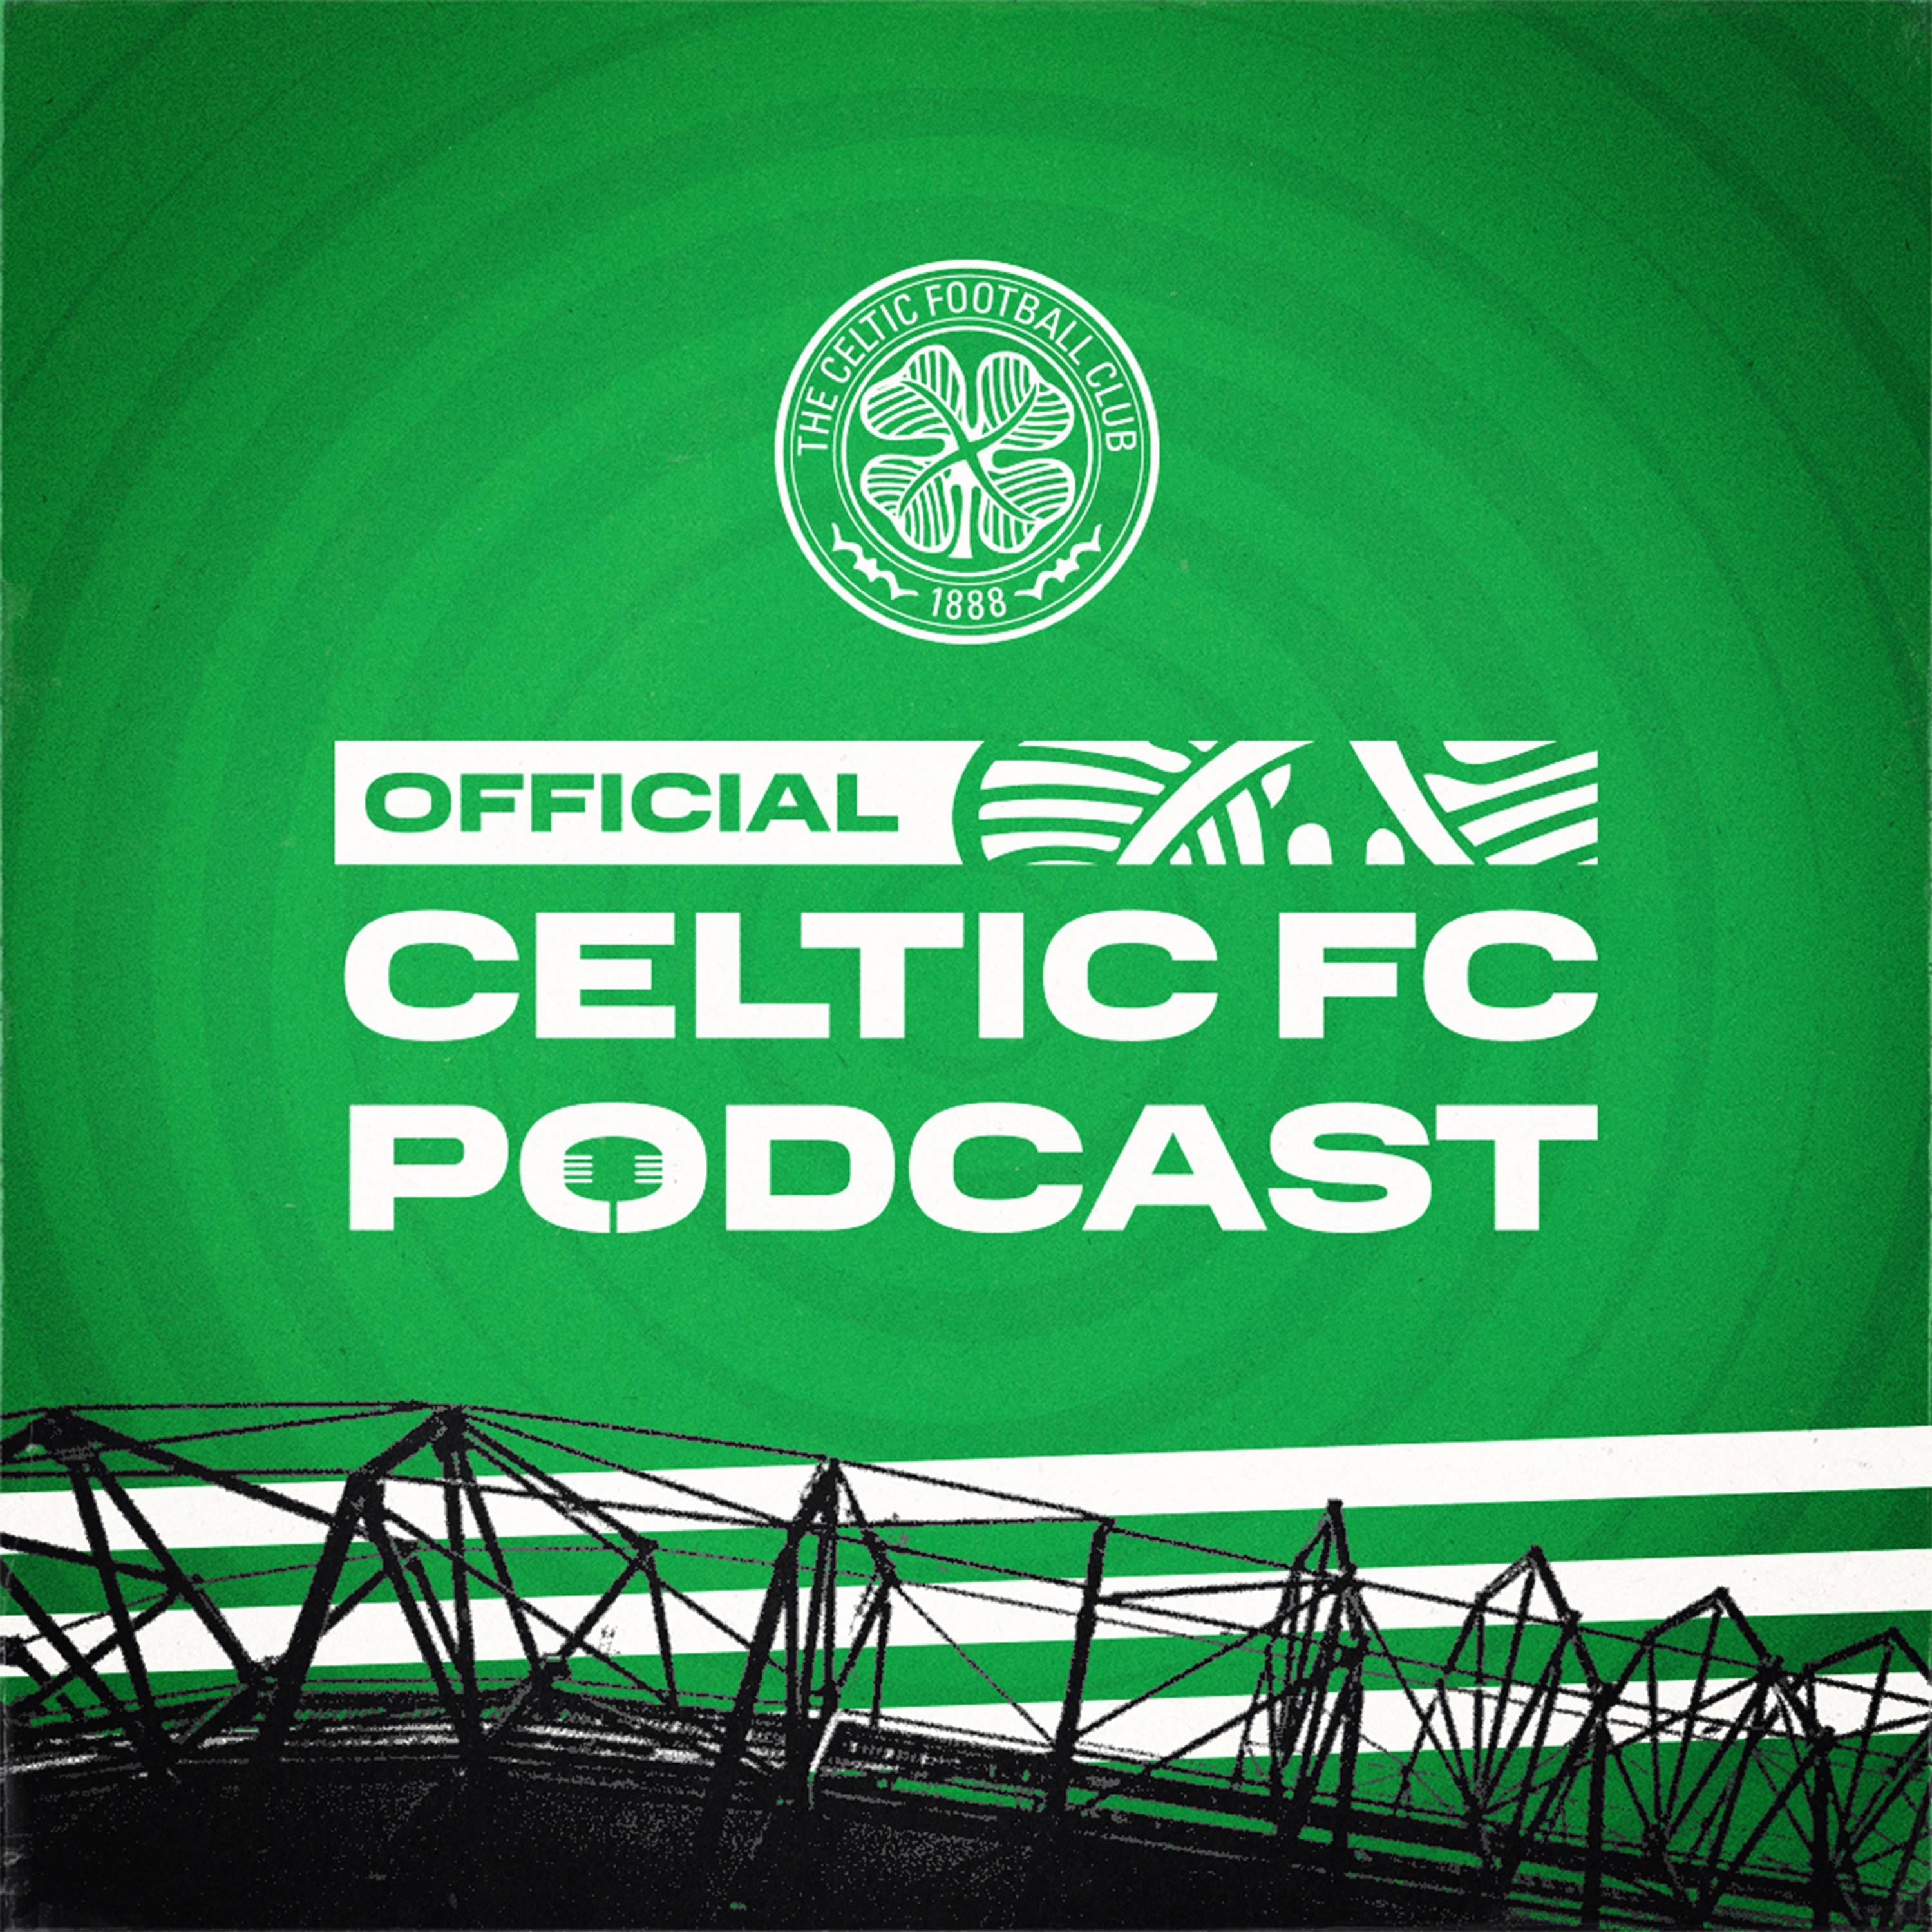 Post-match reaction: Hear from Brendan Rodgers and analysis from Simon Donnelly as Celtic defeat Kilmarnock 3-1 at Celtic Park